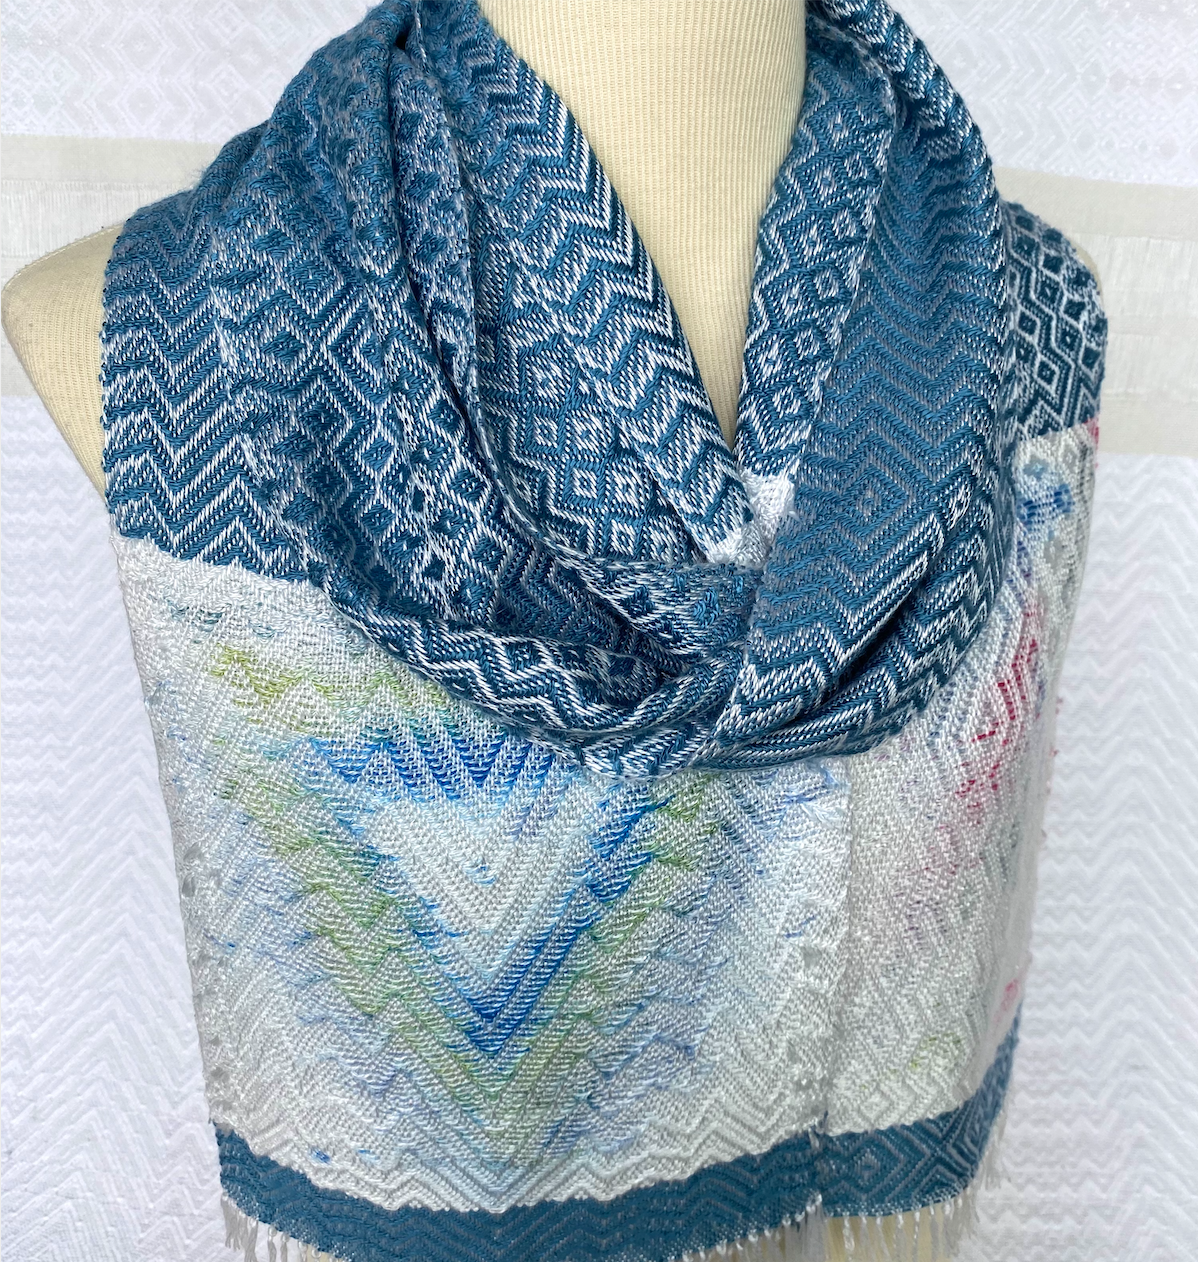  Spring Inlay with Blues Handwoven Scarf      